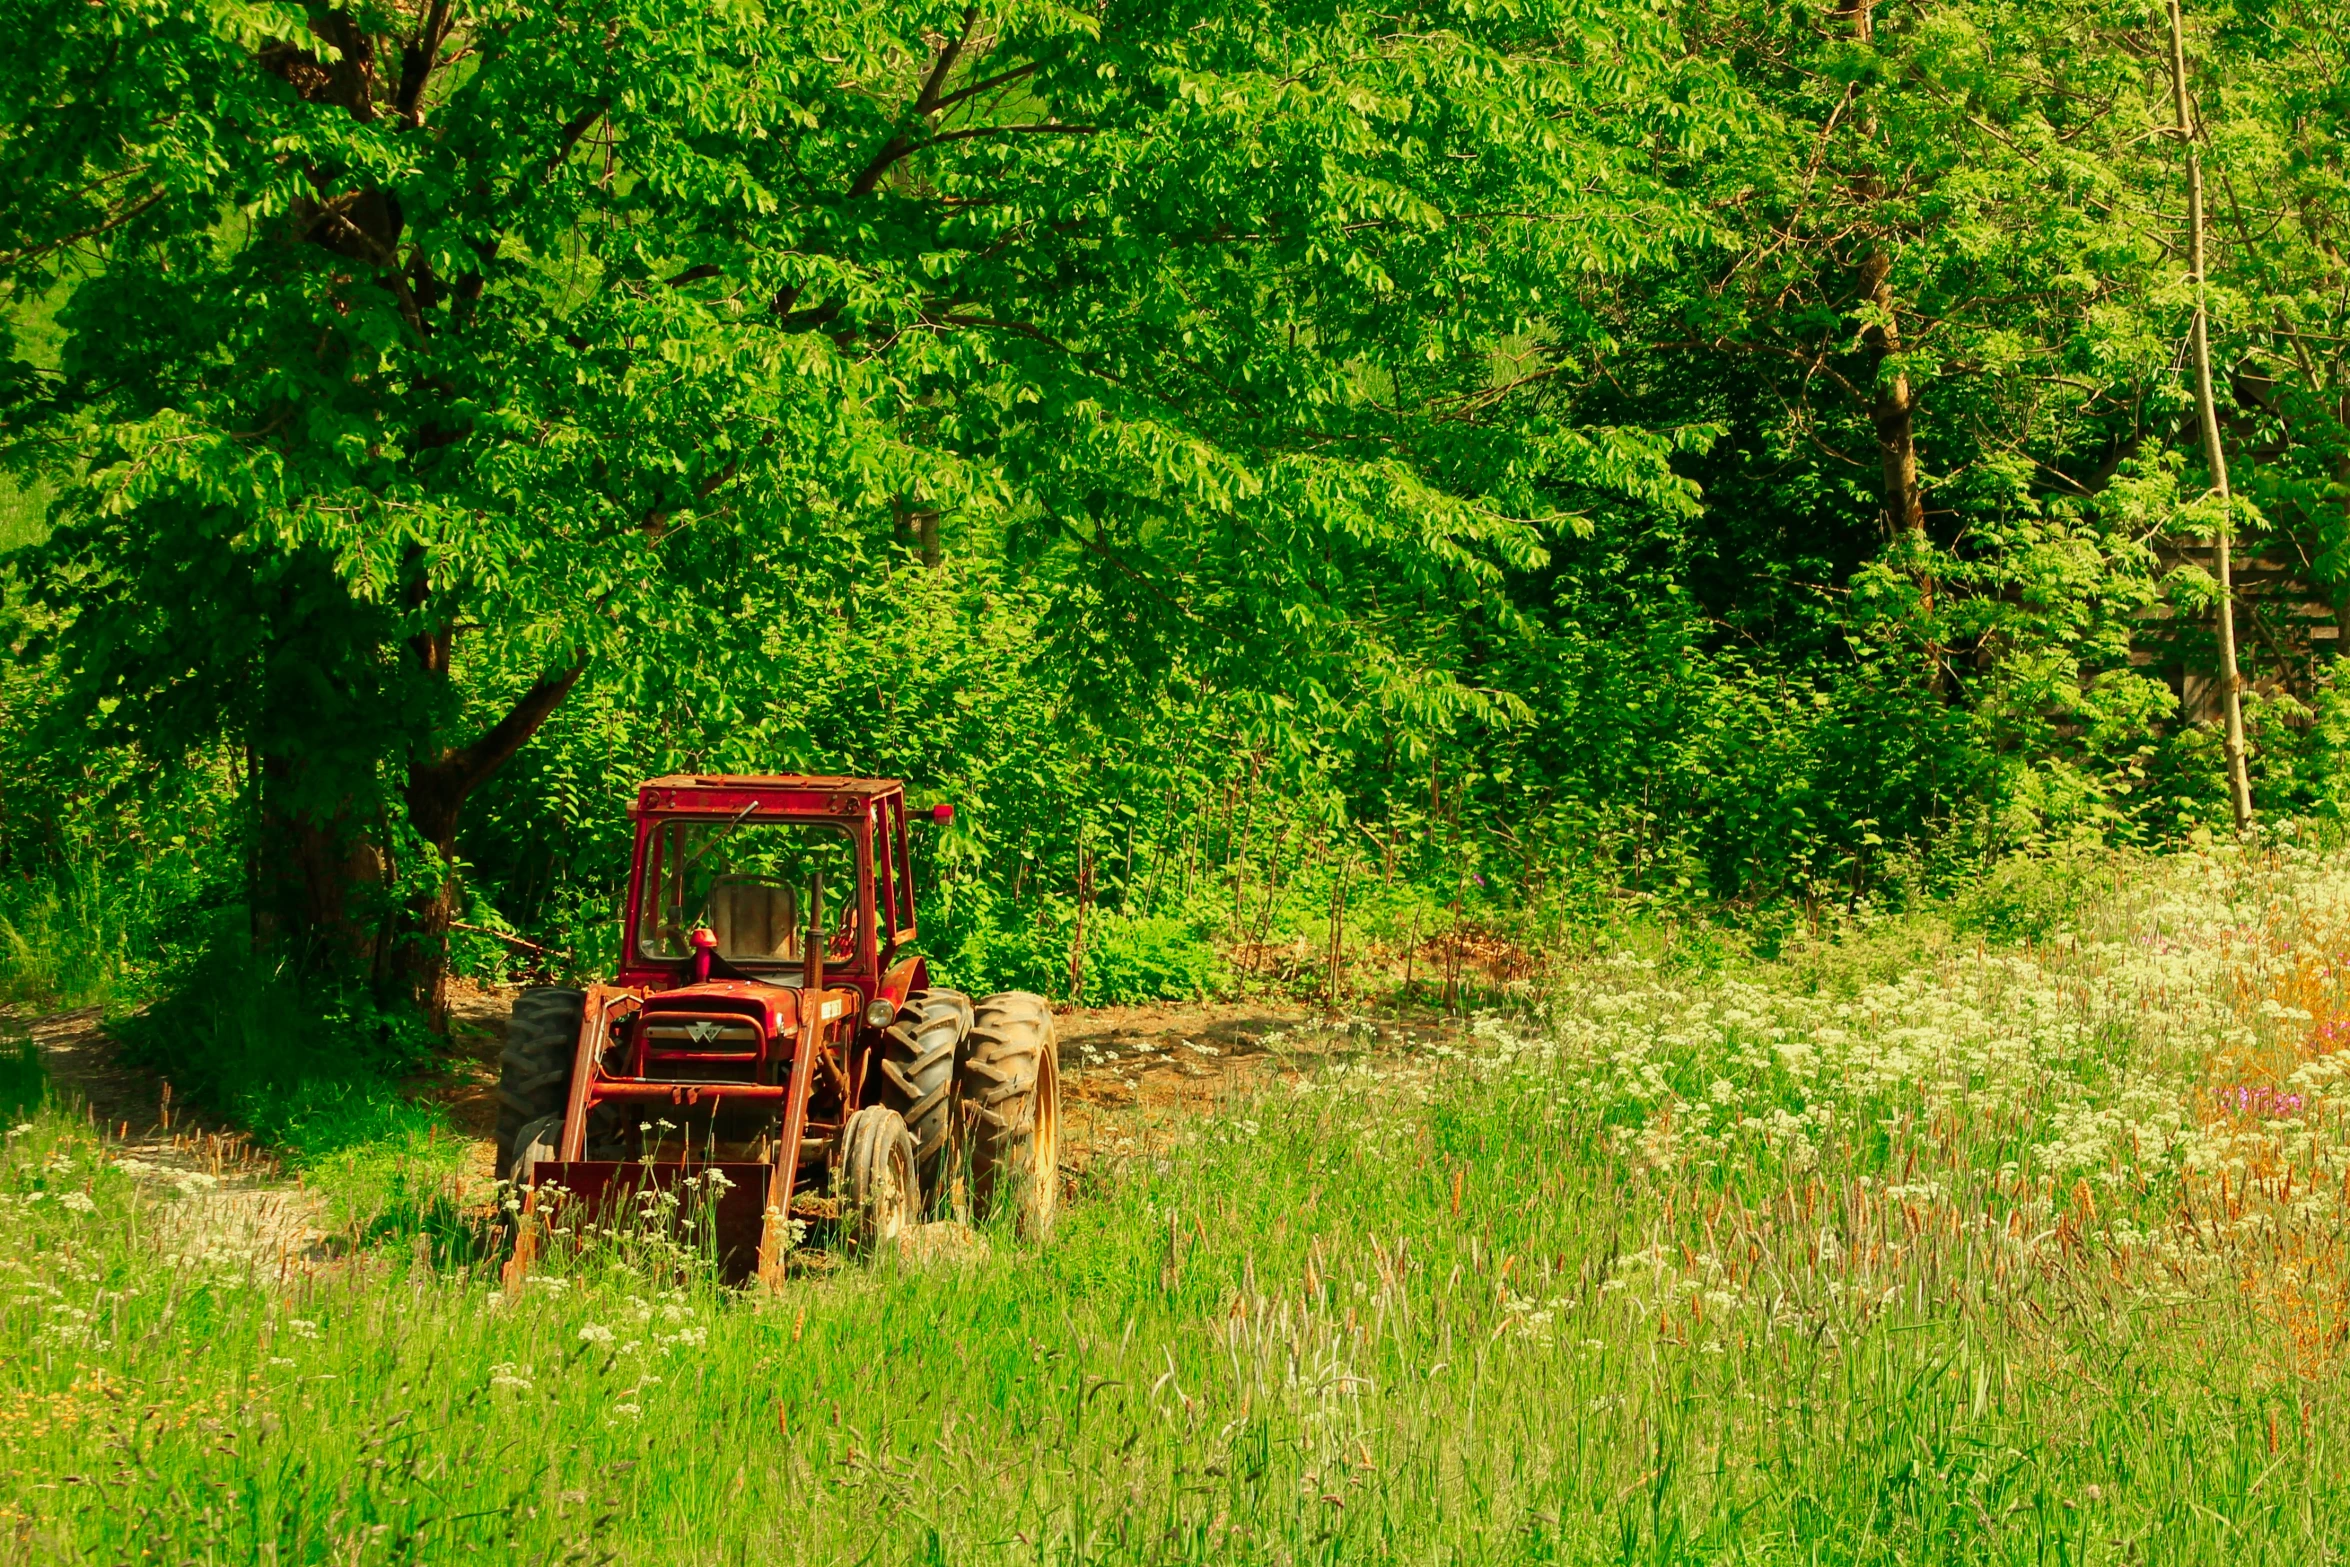 the old red tractor is parked in the tall grass